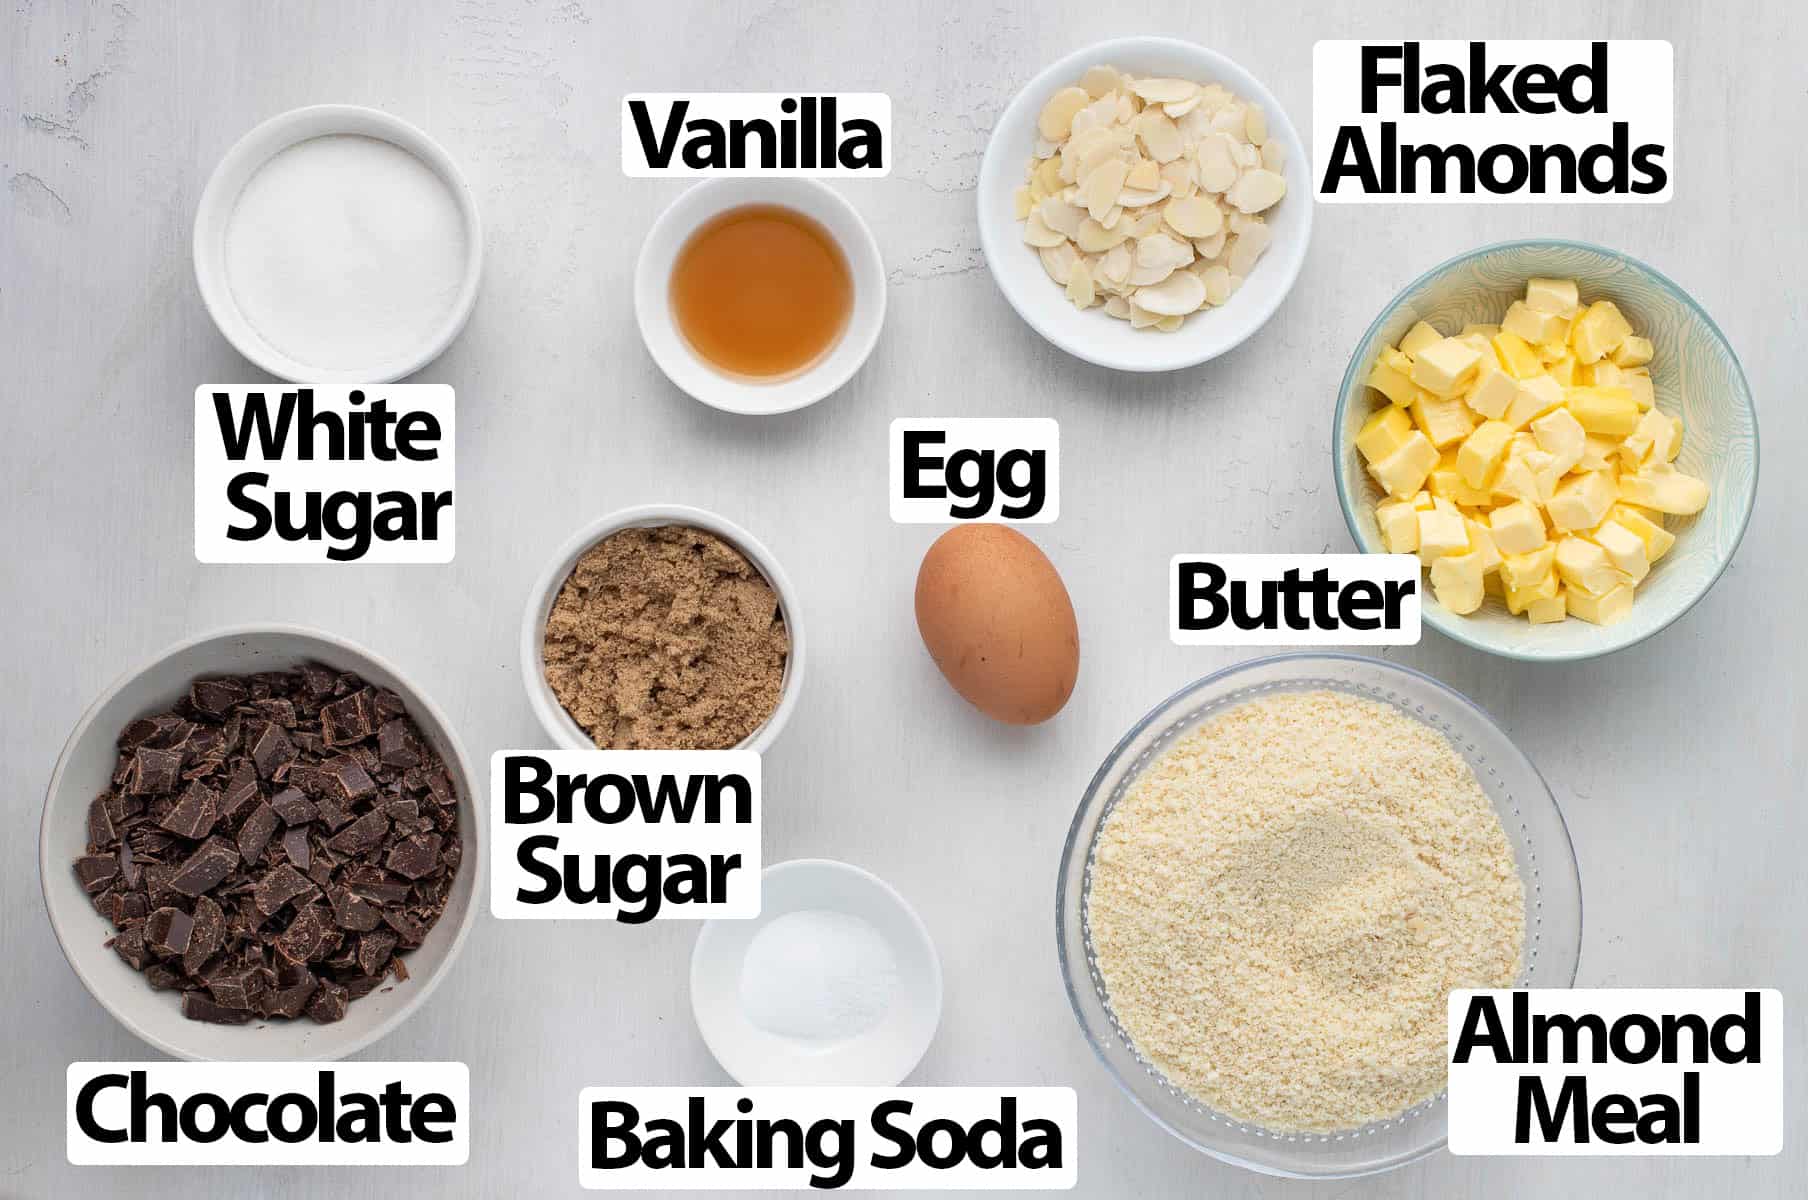 Ingredients over a white surface.